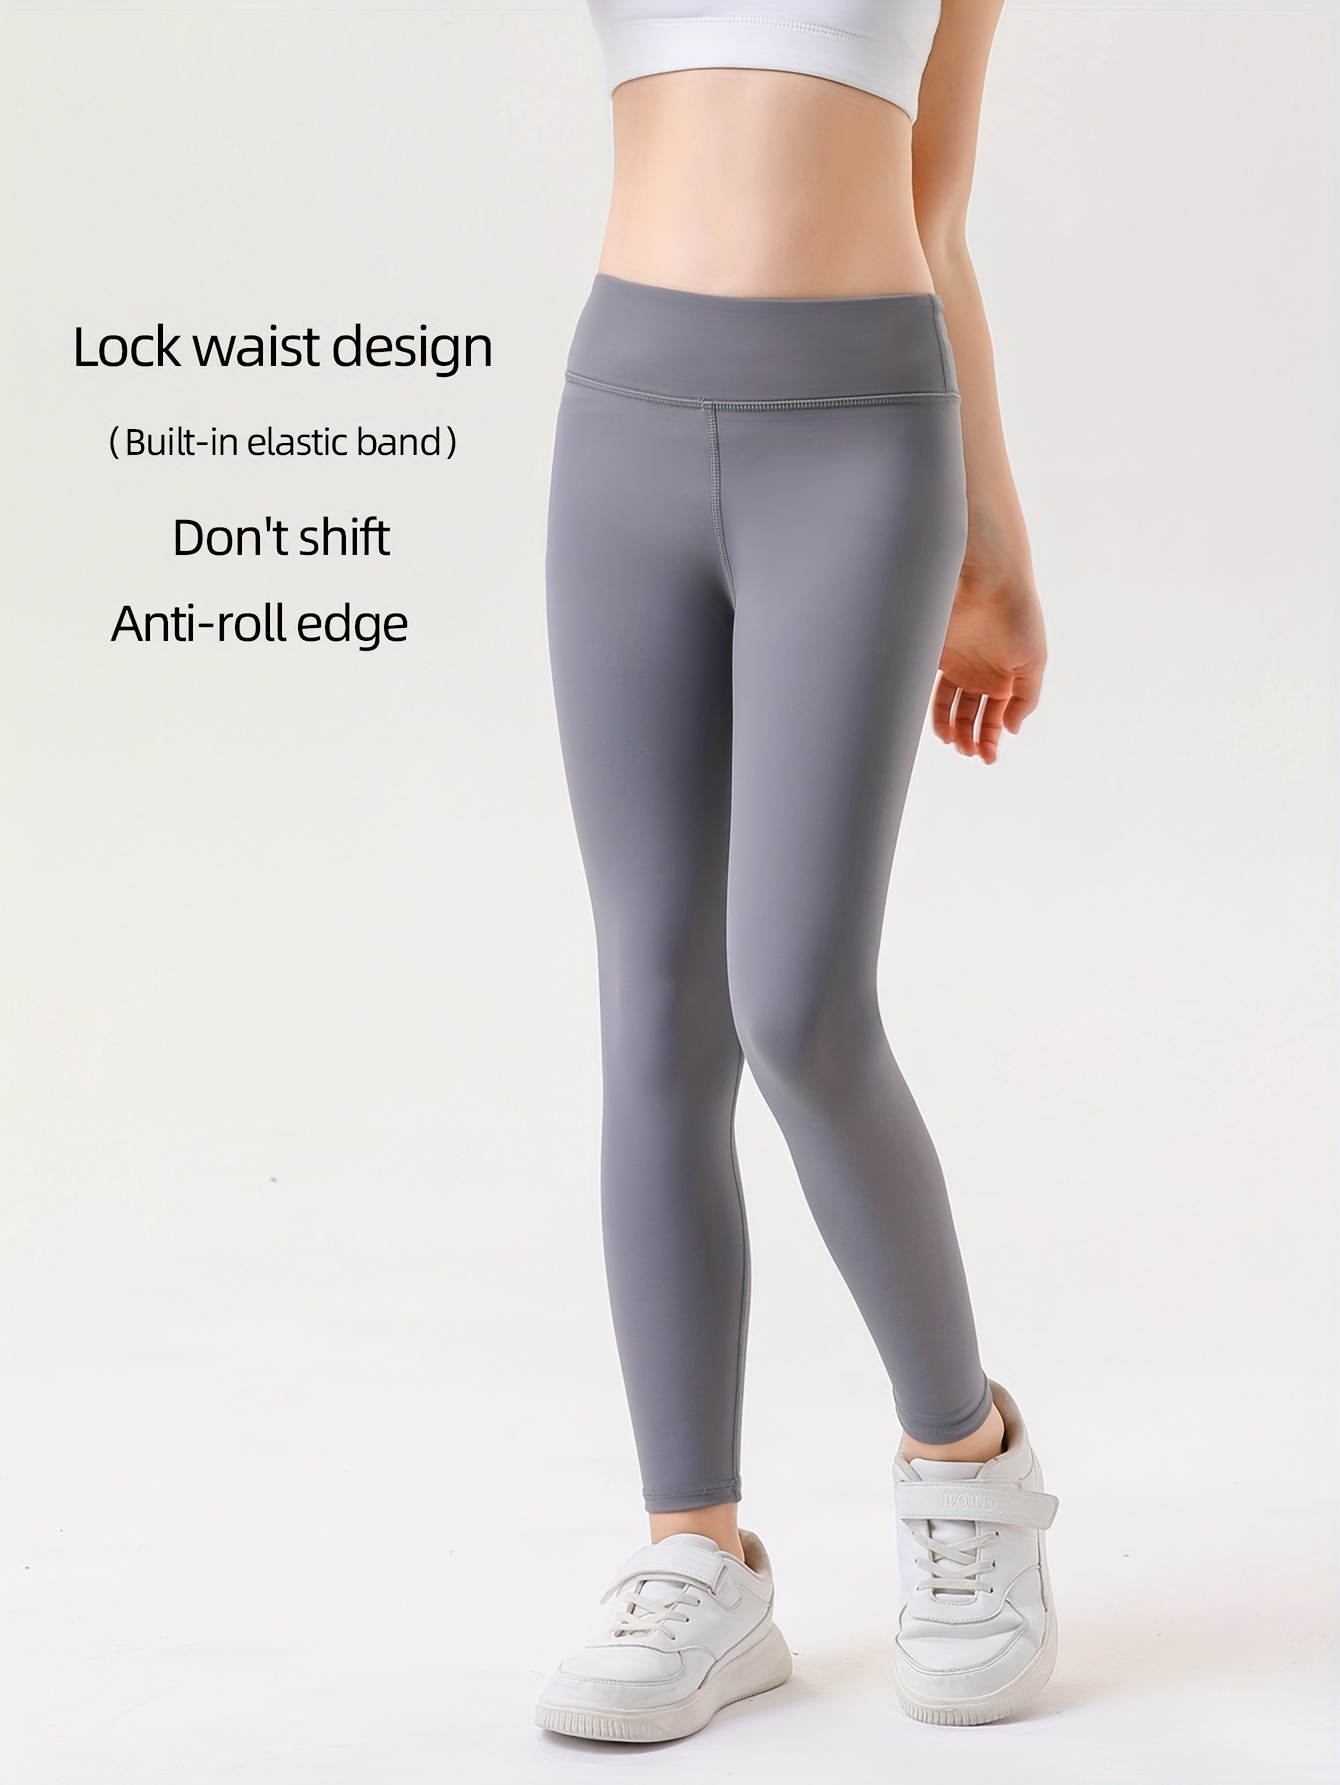 Stretchy & Comfy Solid Leggings Girls Slim Leggings Yoga Sports Running  Gift, Free Shipping For New Users